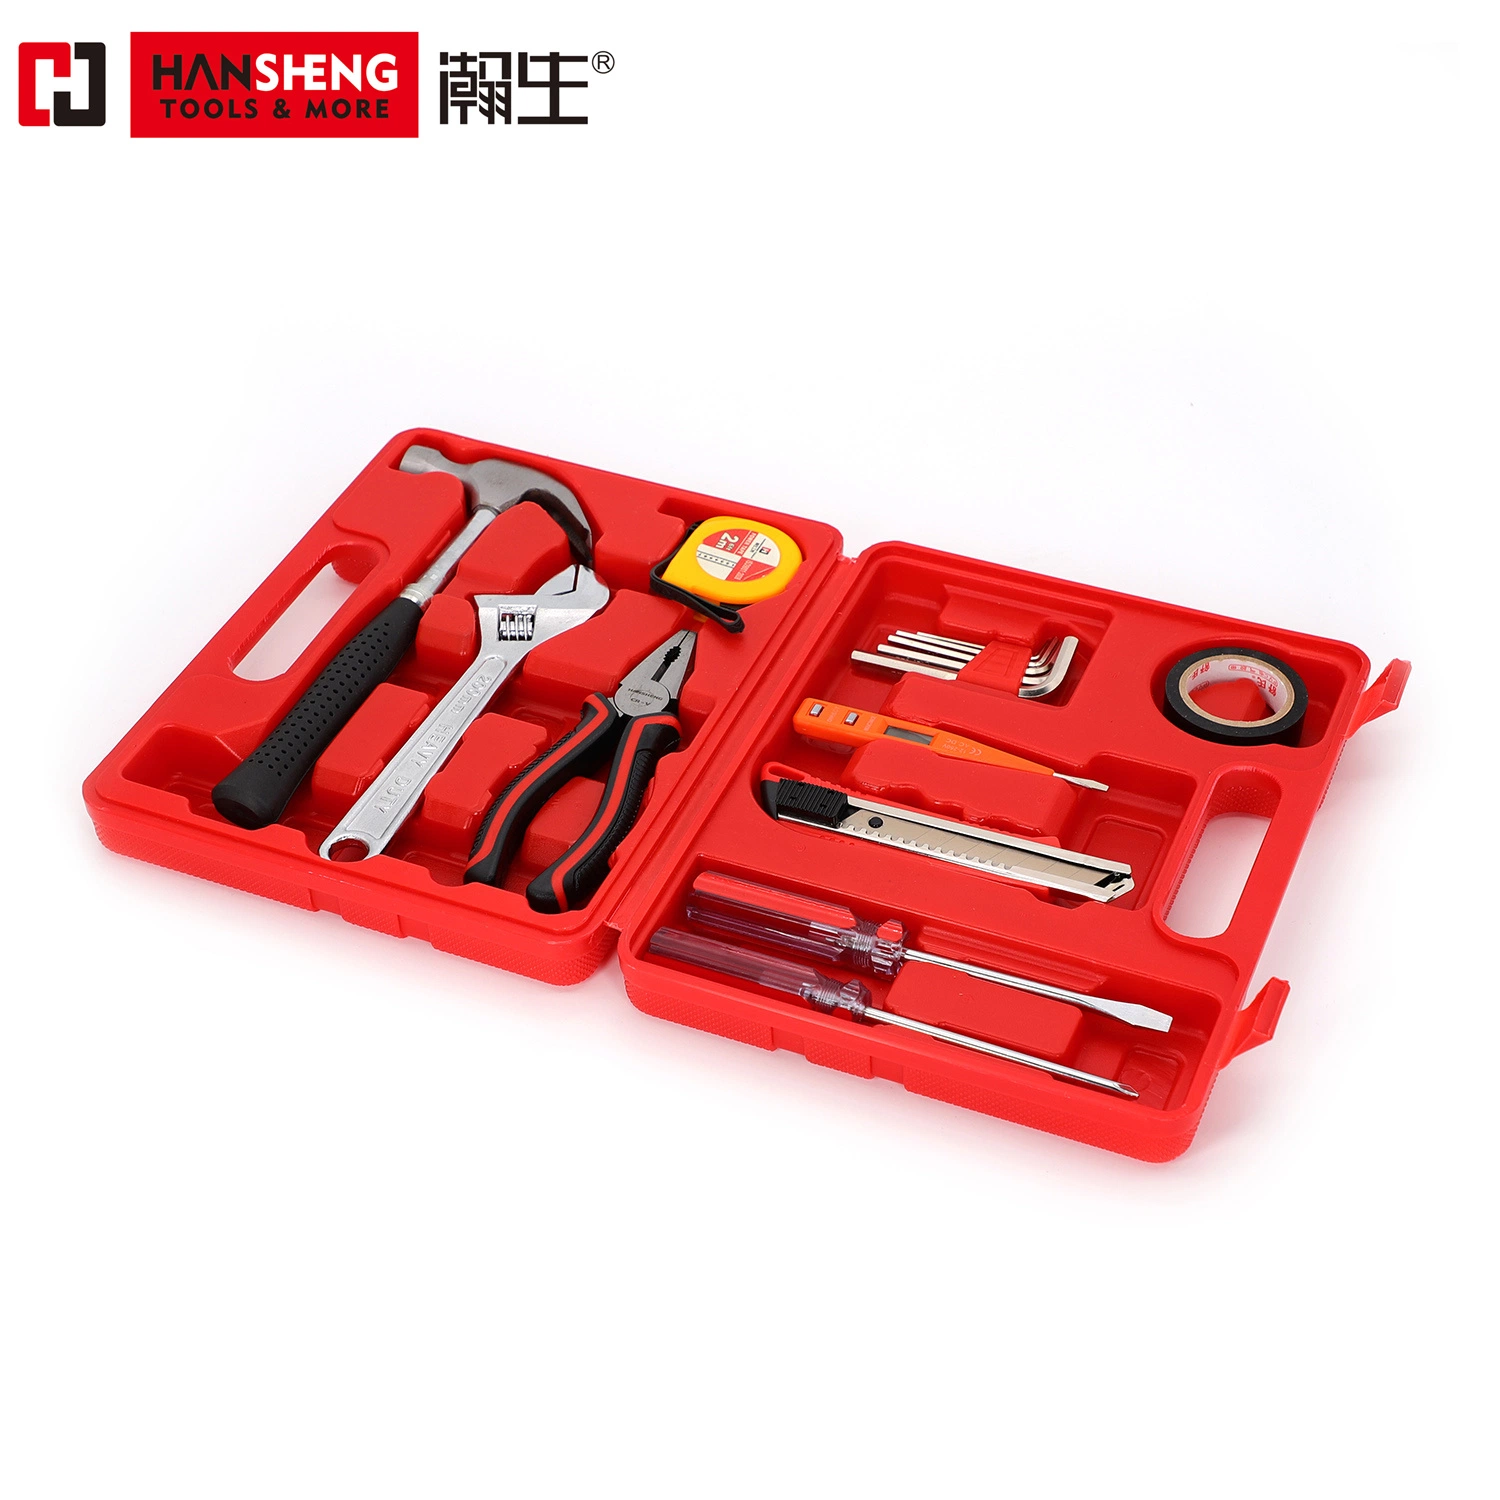 Professional Household Set Tools, Hand Tool, Hardware Tool, Plastic Toolbox, Combination, Set, Gift Tools, Pliers, Wire Clamp, Hammer, Wrench, Snips, 8 Set